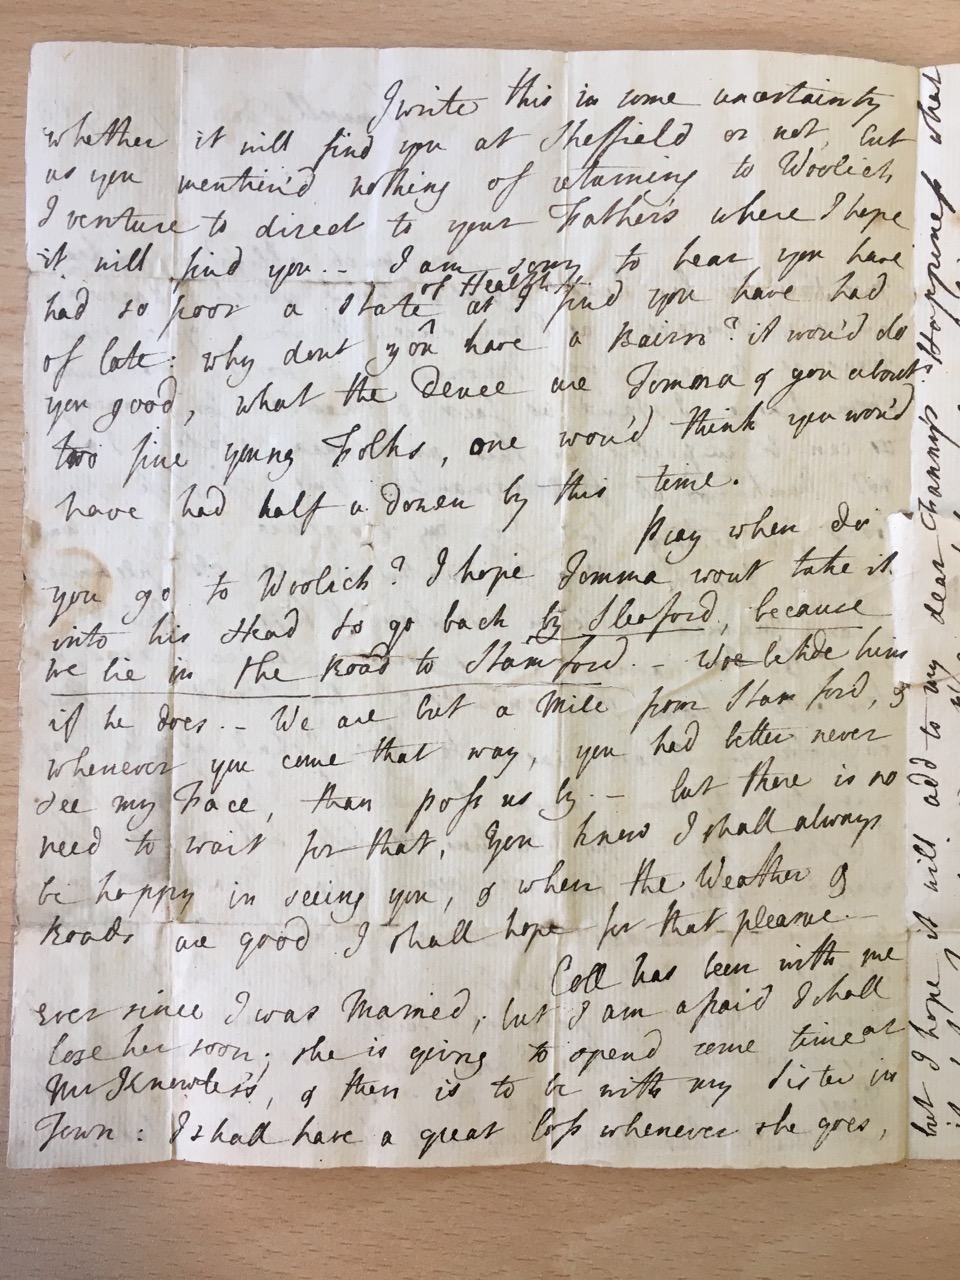 Image #2 of letter: S[ally] Digby and I Collier to Ann Hare, 27 December 1768